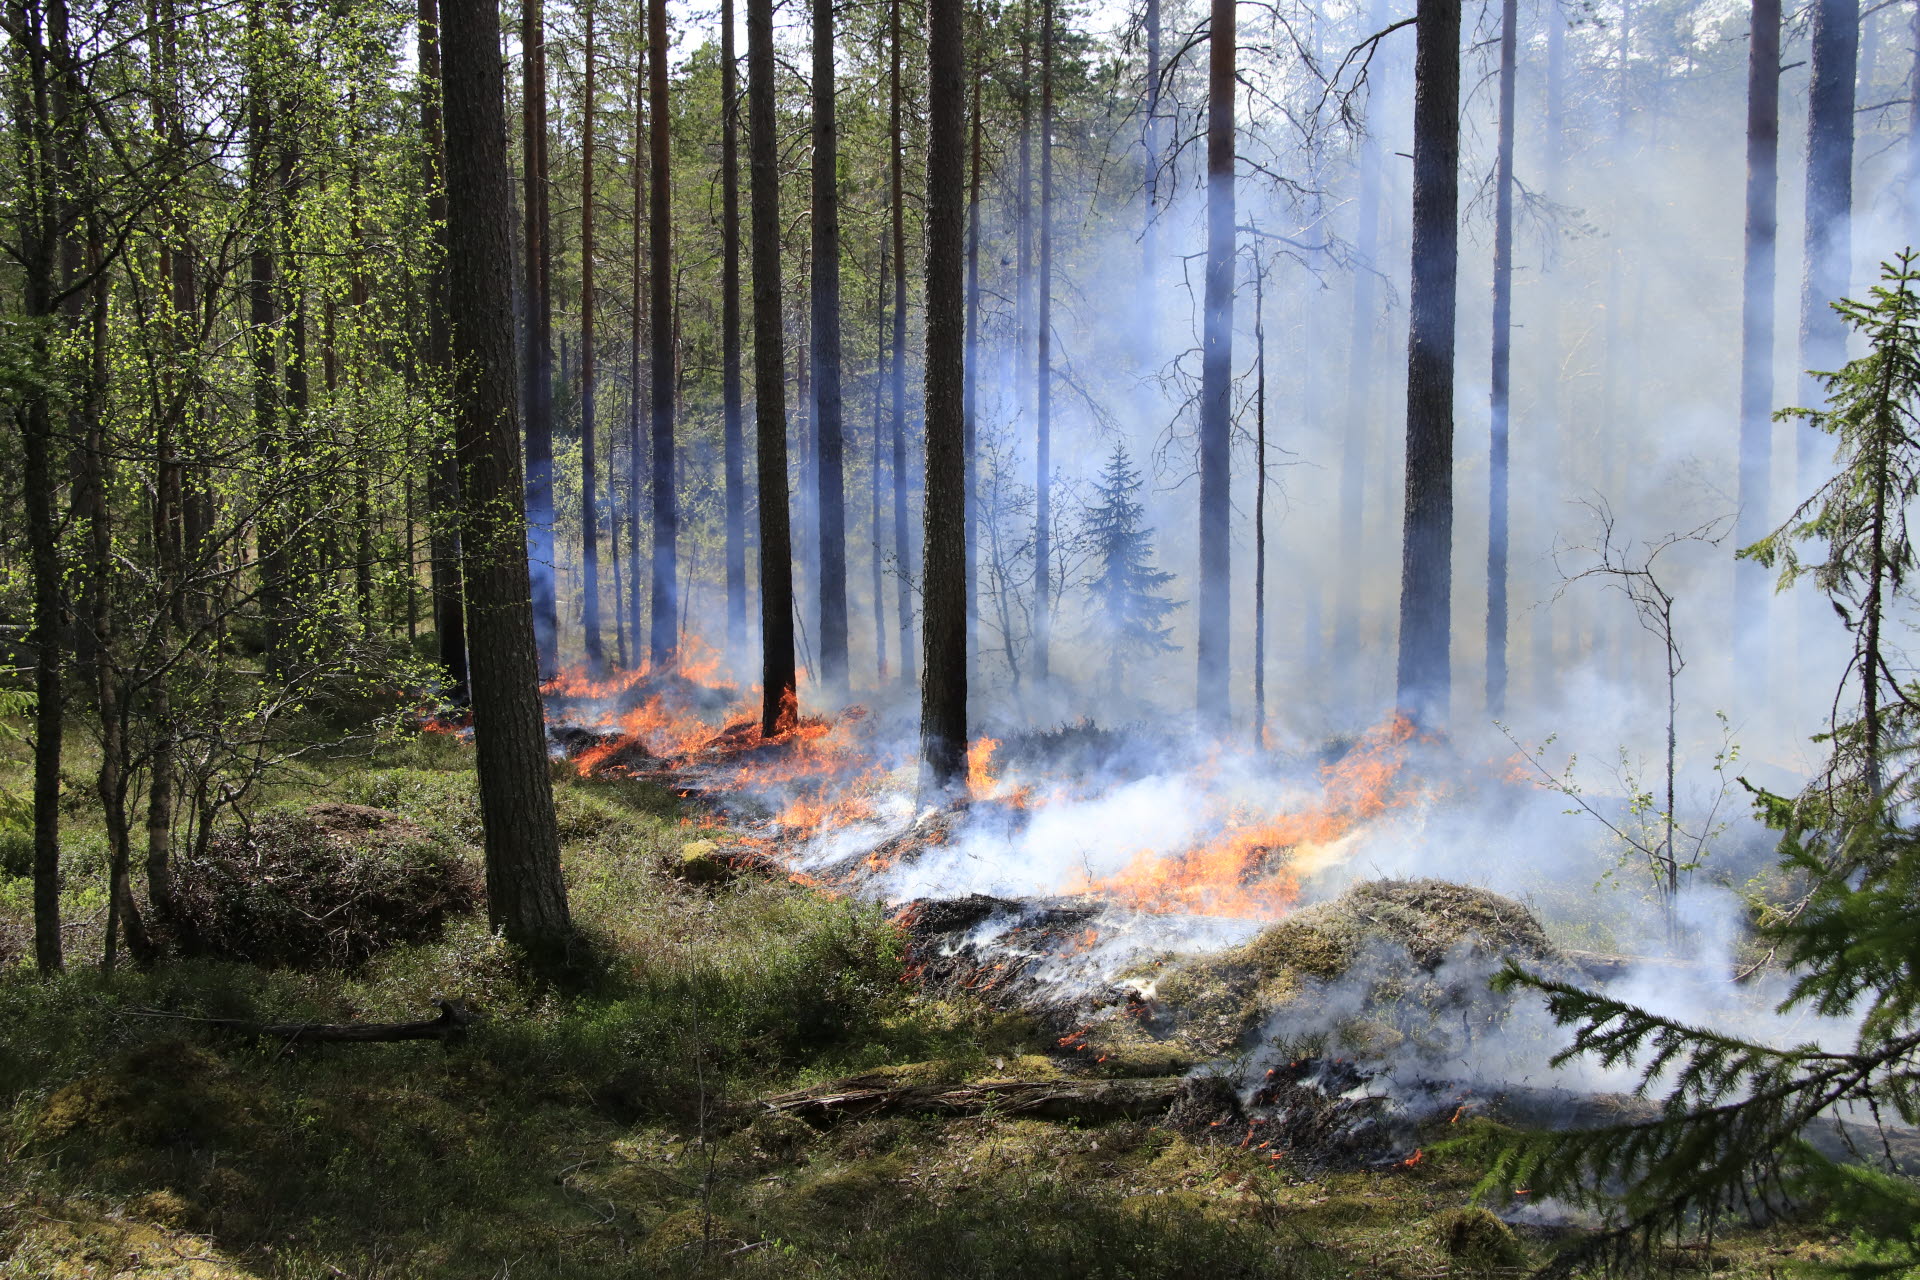  Burning forests – for nature’s best